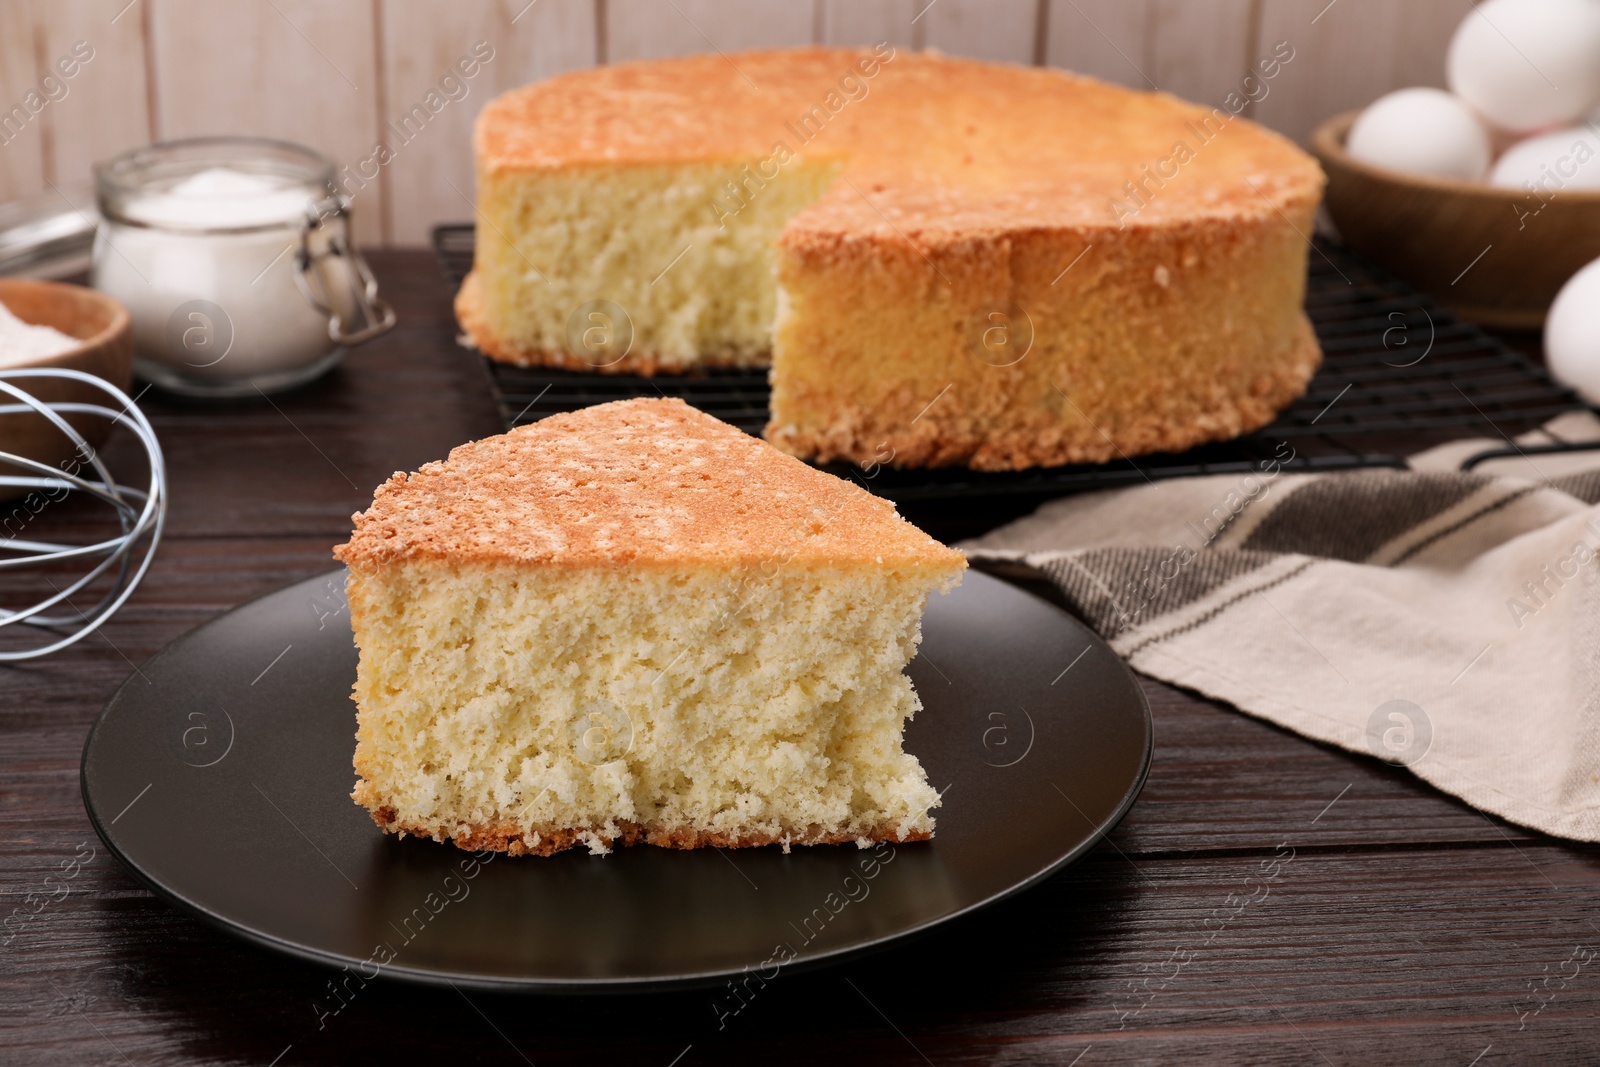 Photo of Tasty sponge cake and ingredients on wooden table